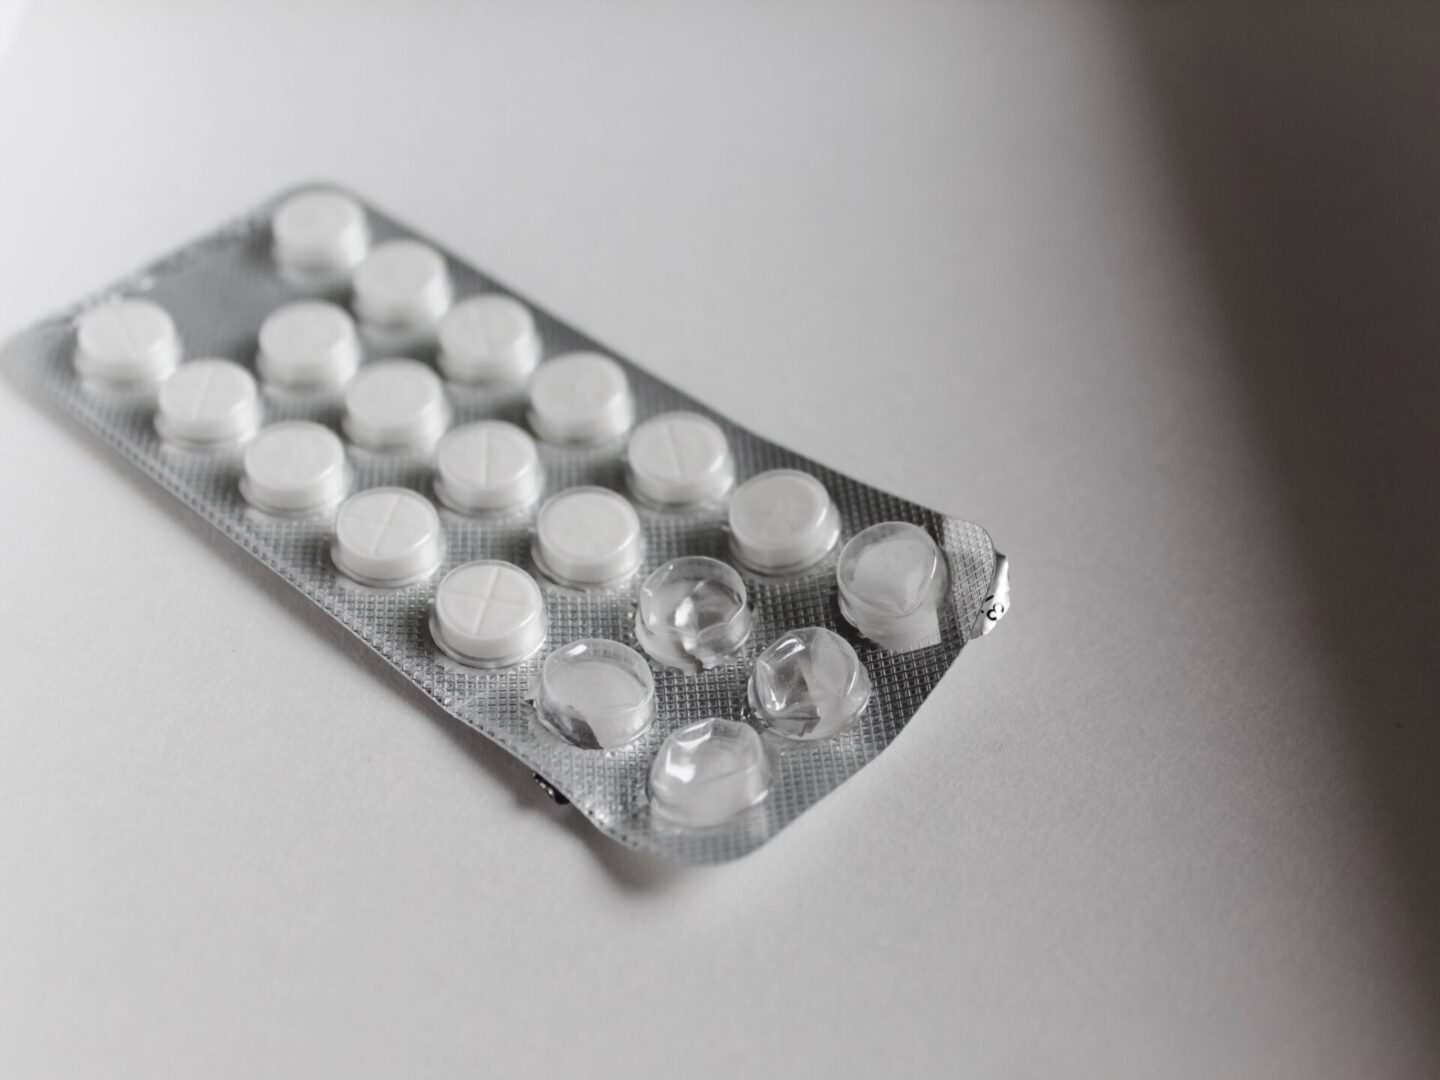 A close up of a pack of pills